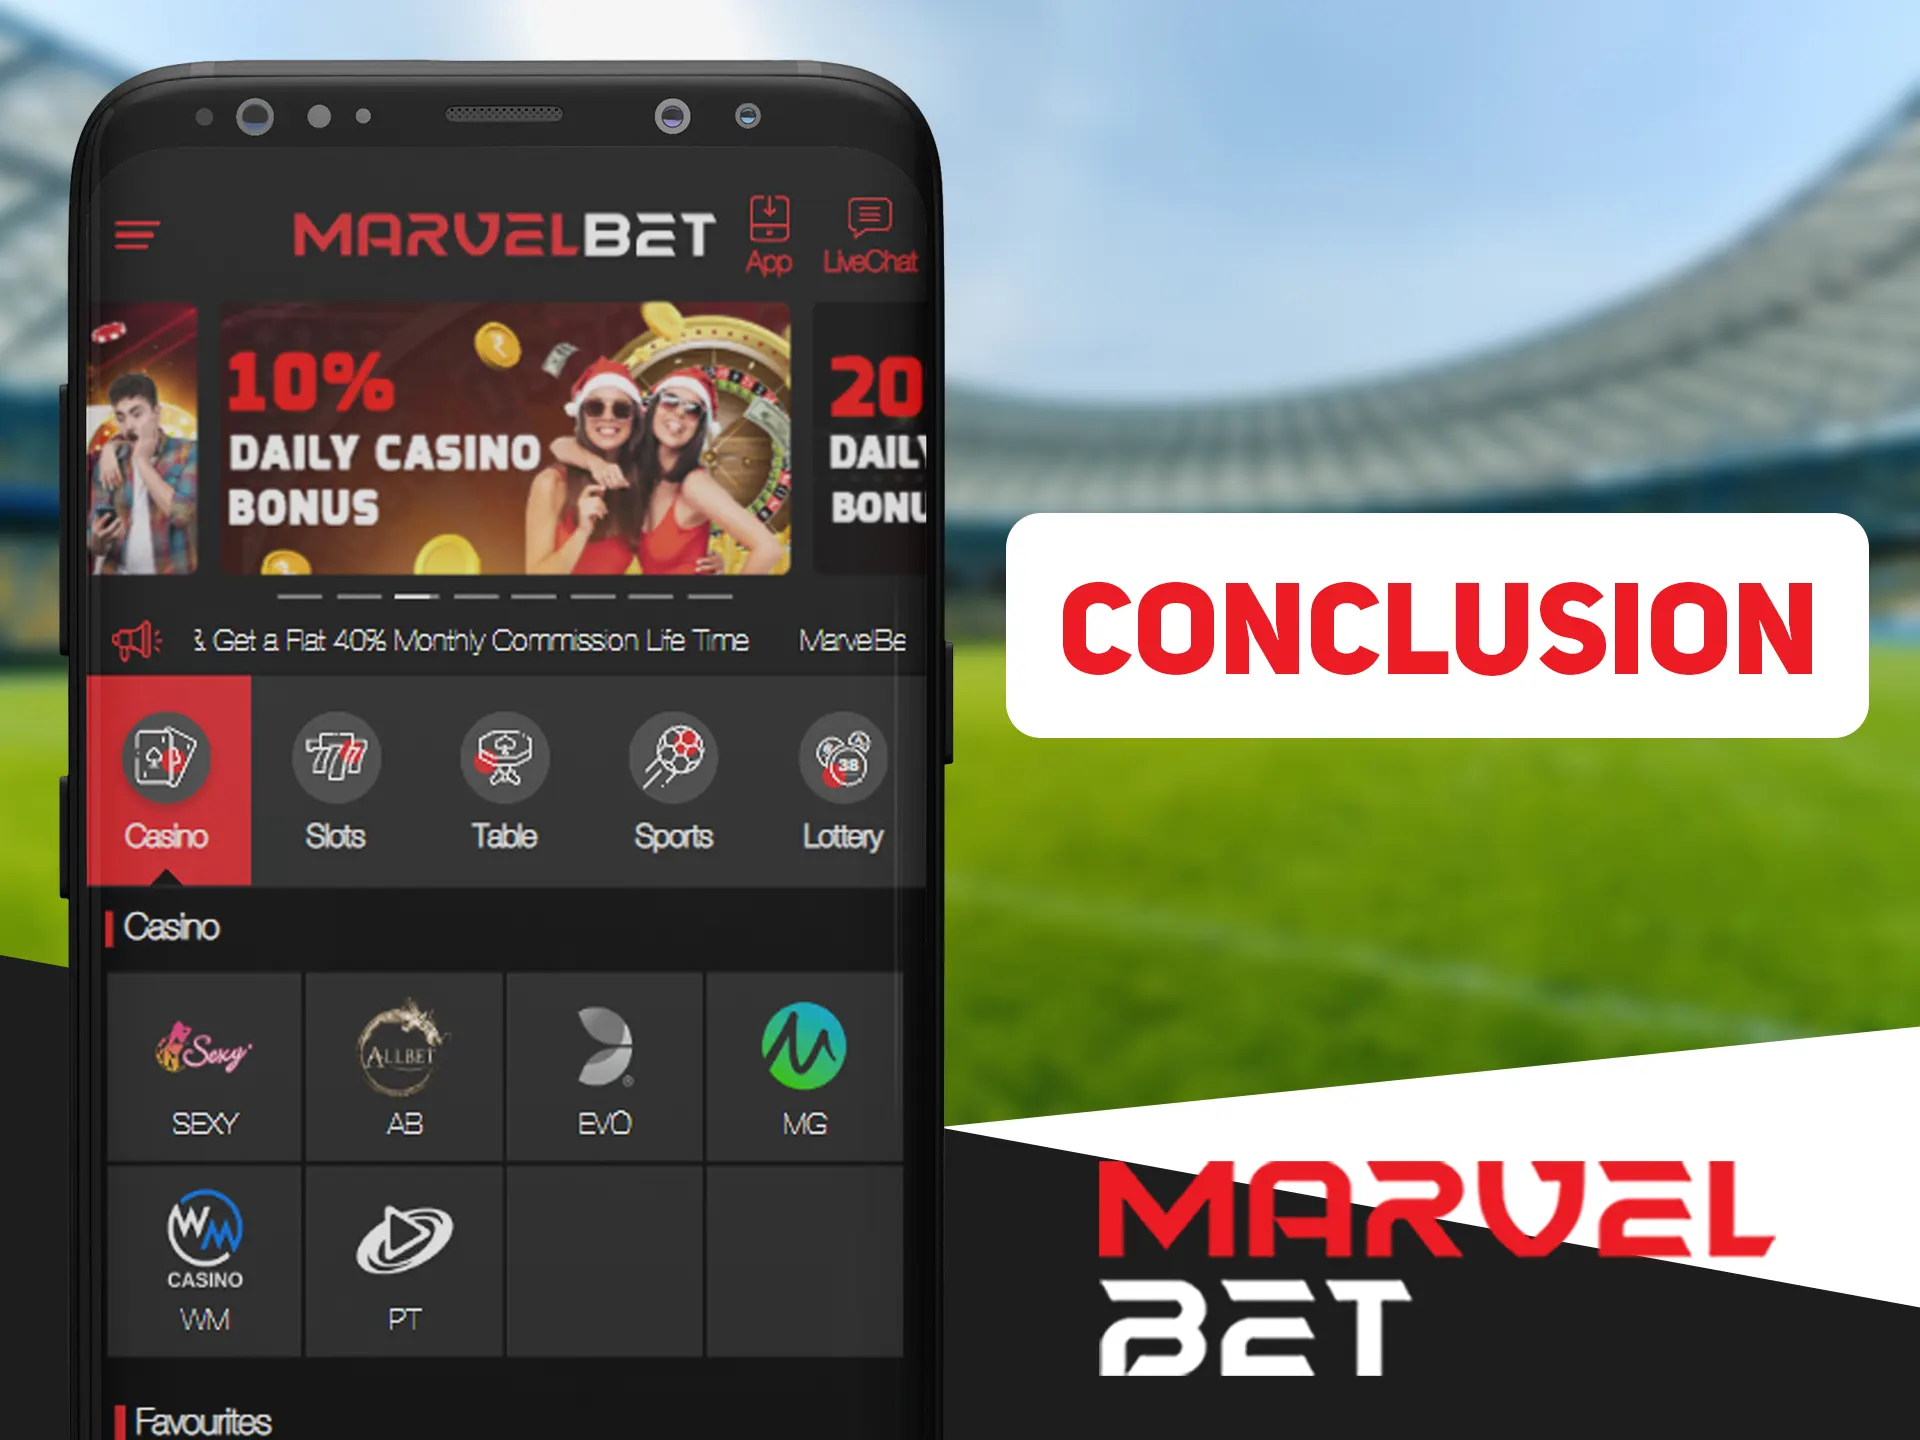 Marvelbet app is a convinient way to making bets.